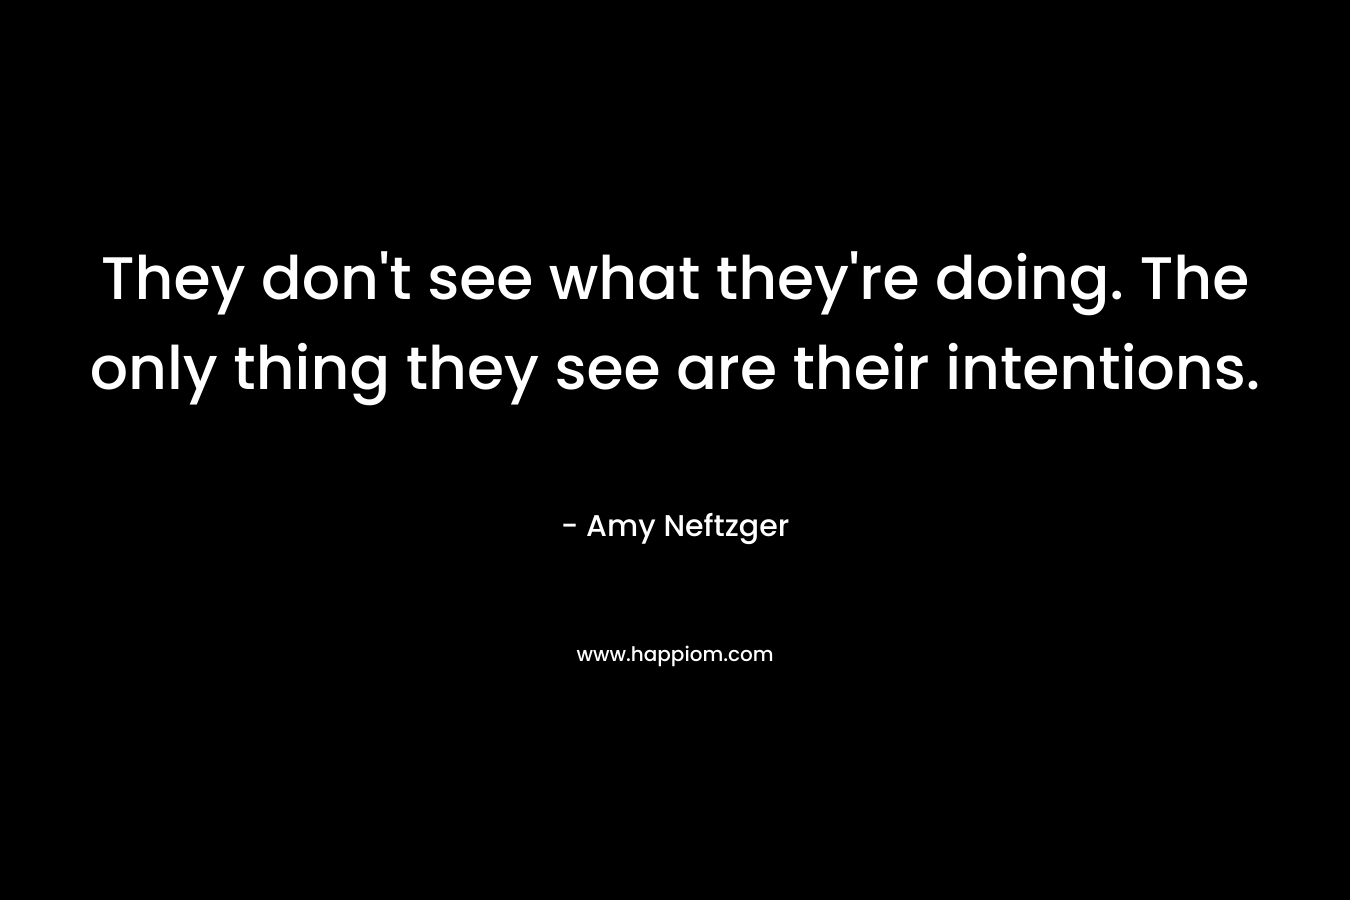 They don’t see what they’re doing. The only thing they see are their intentions. – Amy Neftzger